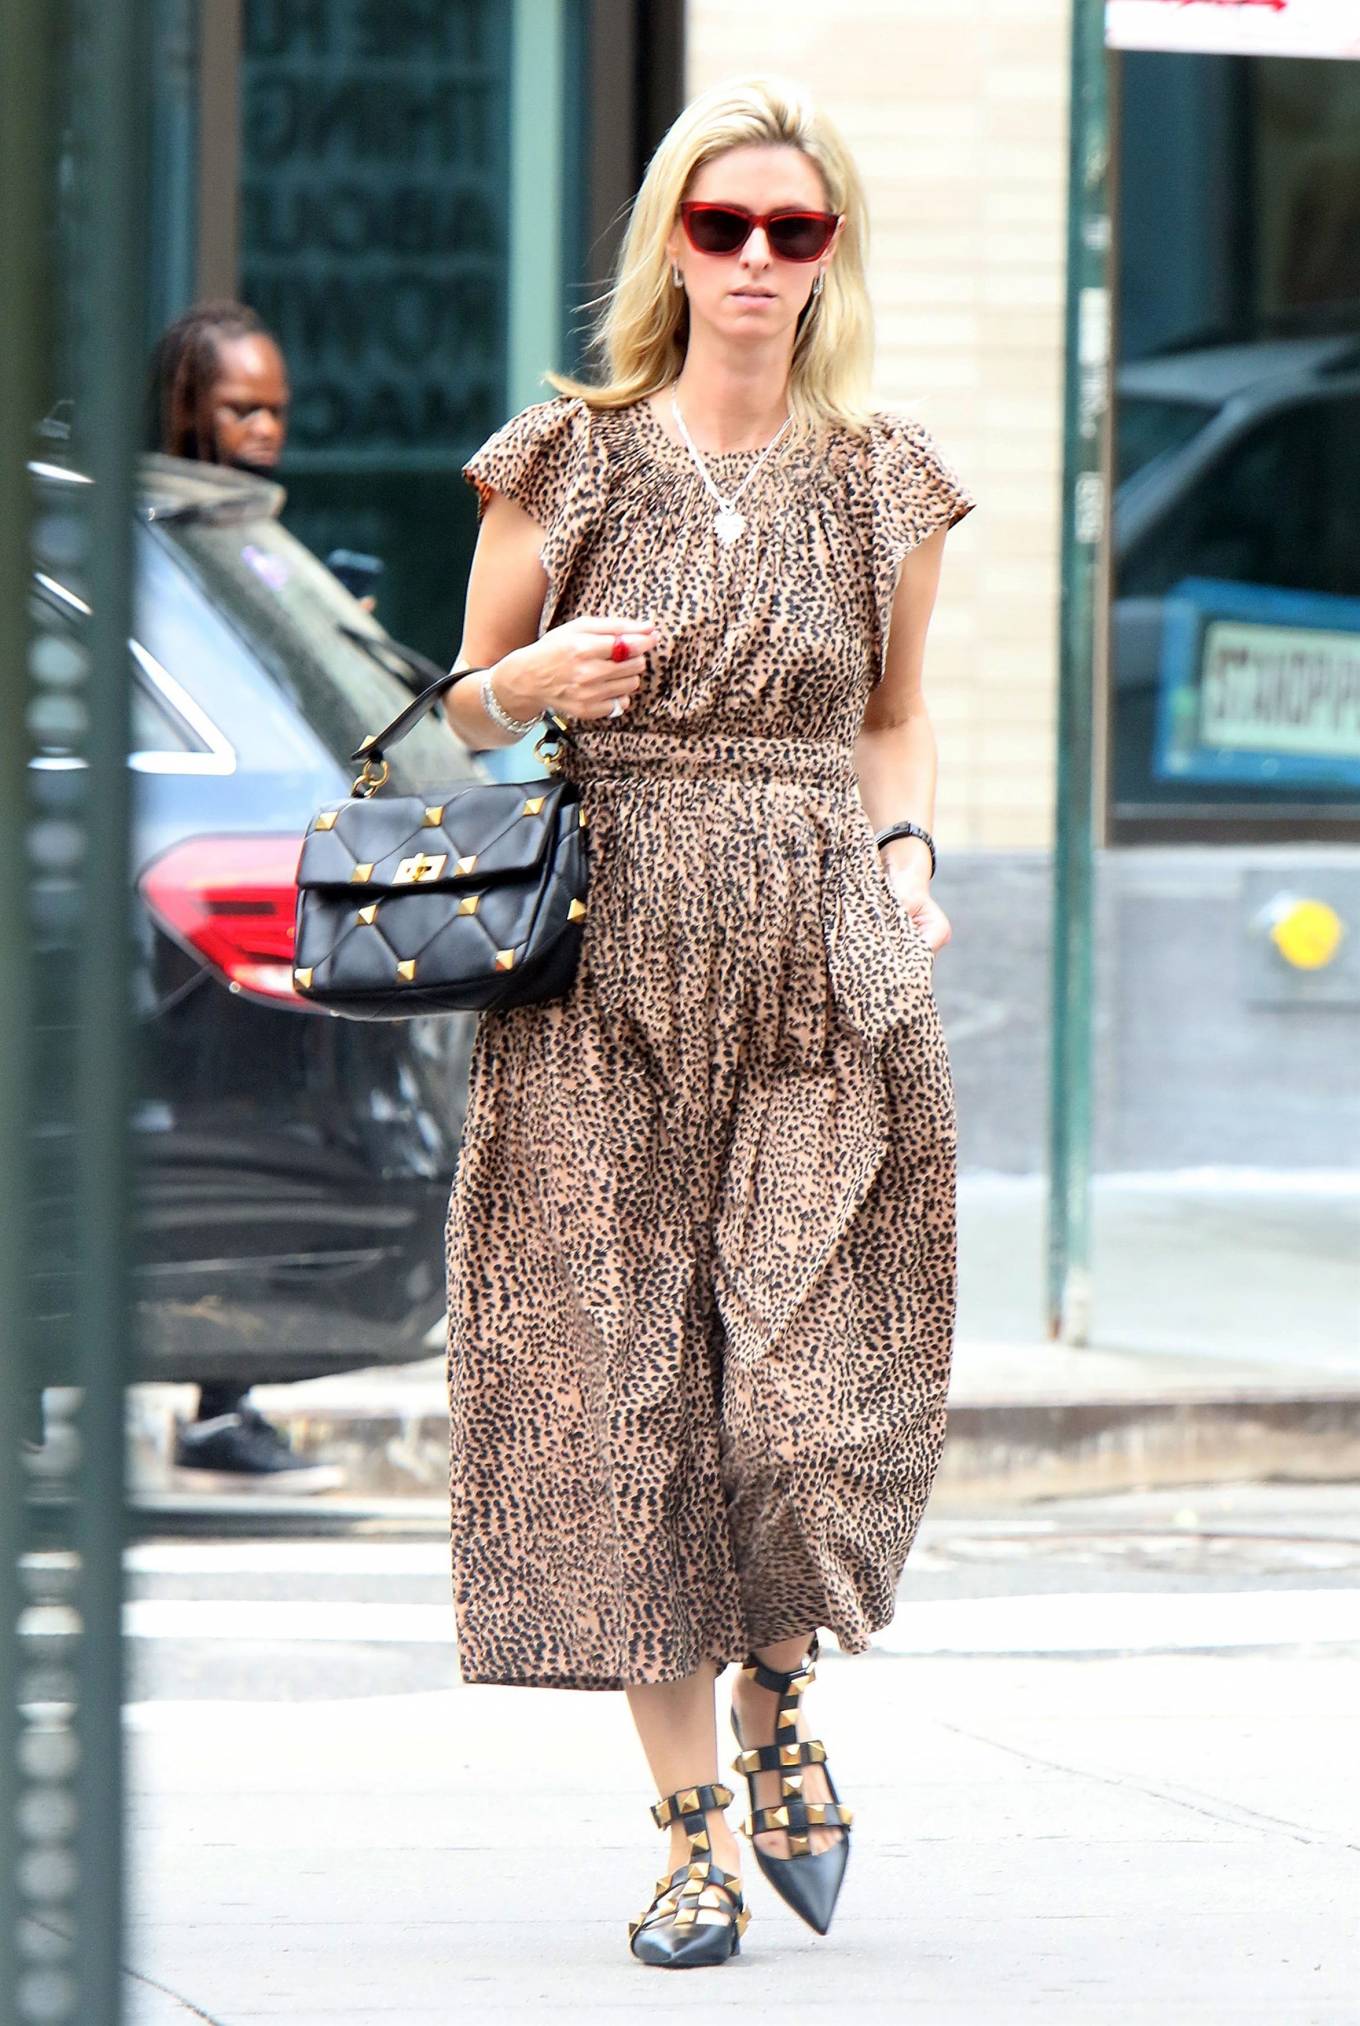 Nicky Hilton 2021 : Nicky Hilton – Rocks leopard print dress while out in Downtown Manhattan-16